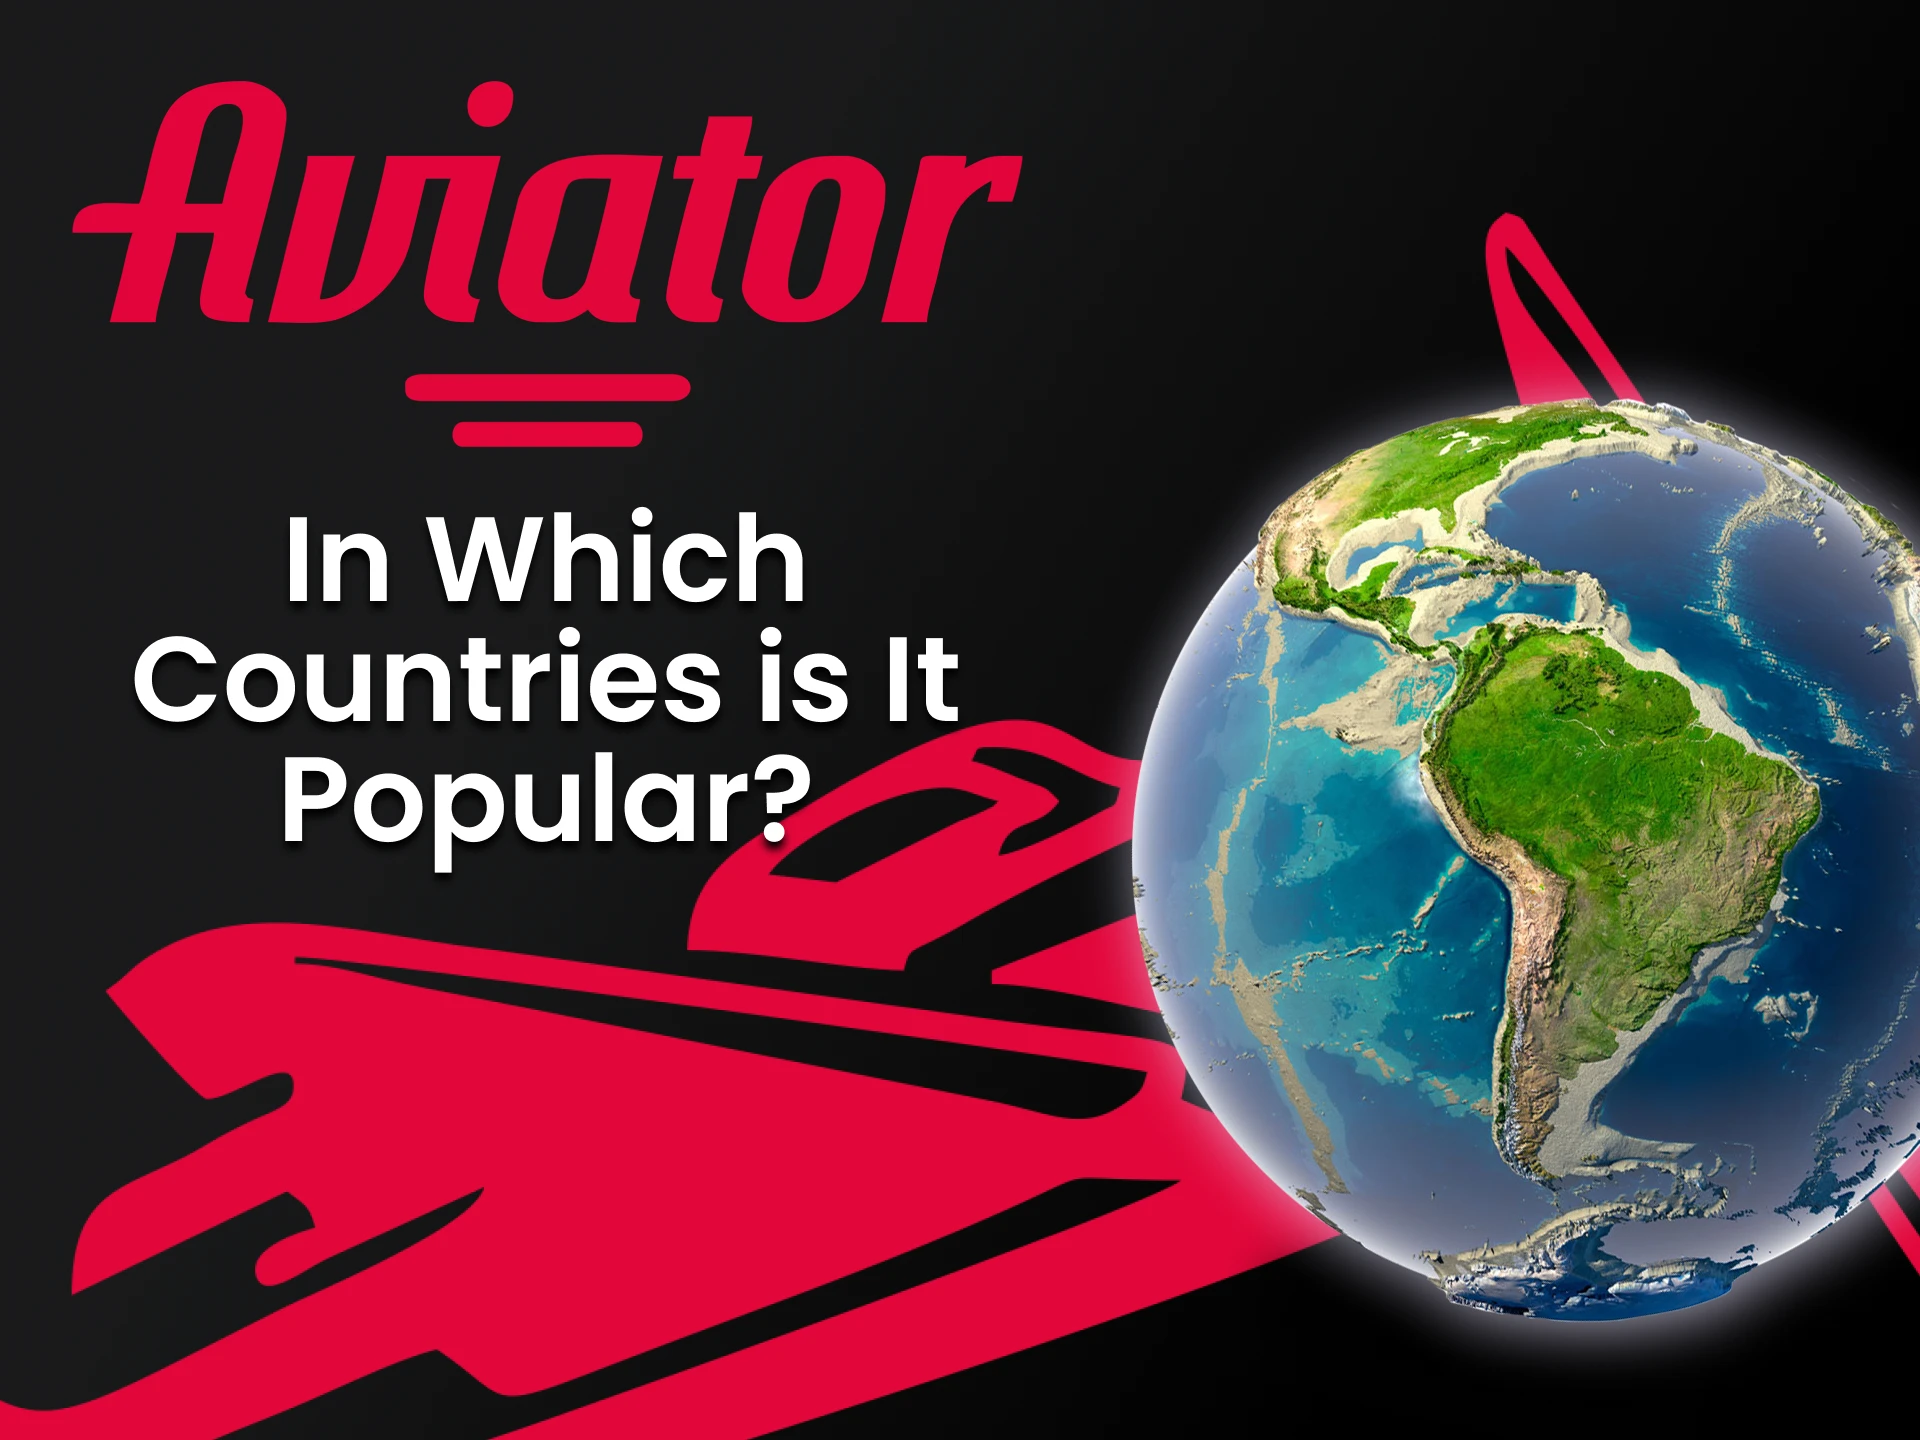 We will tell you in which countries Aviator is popular.